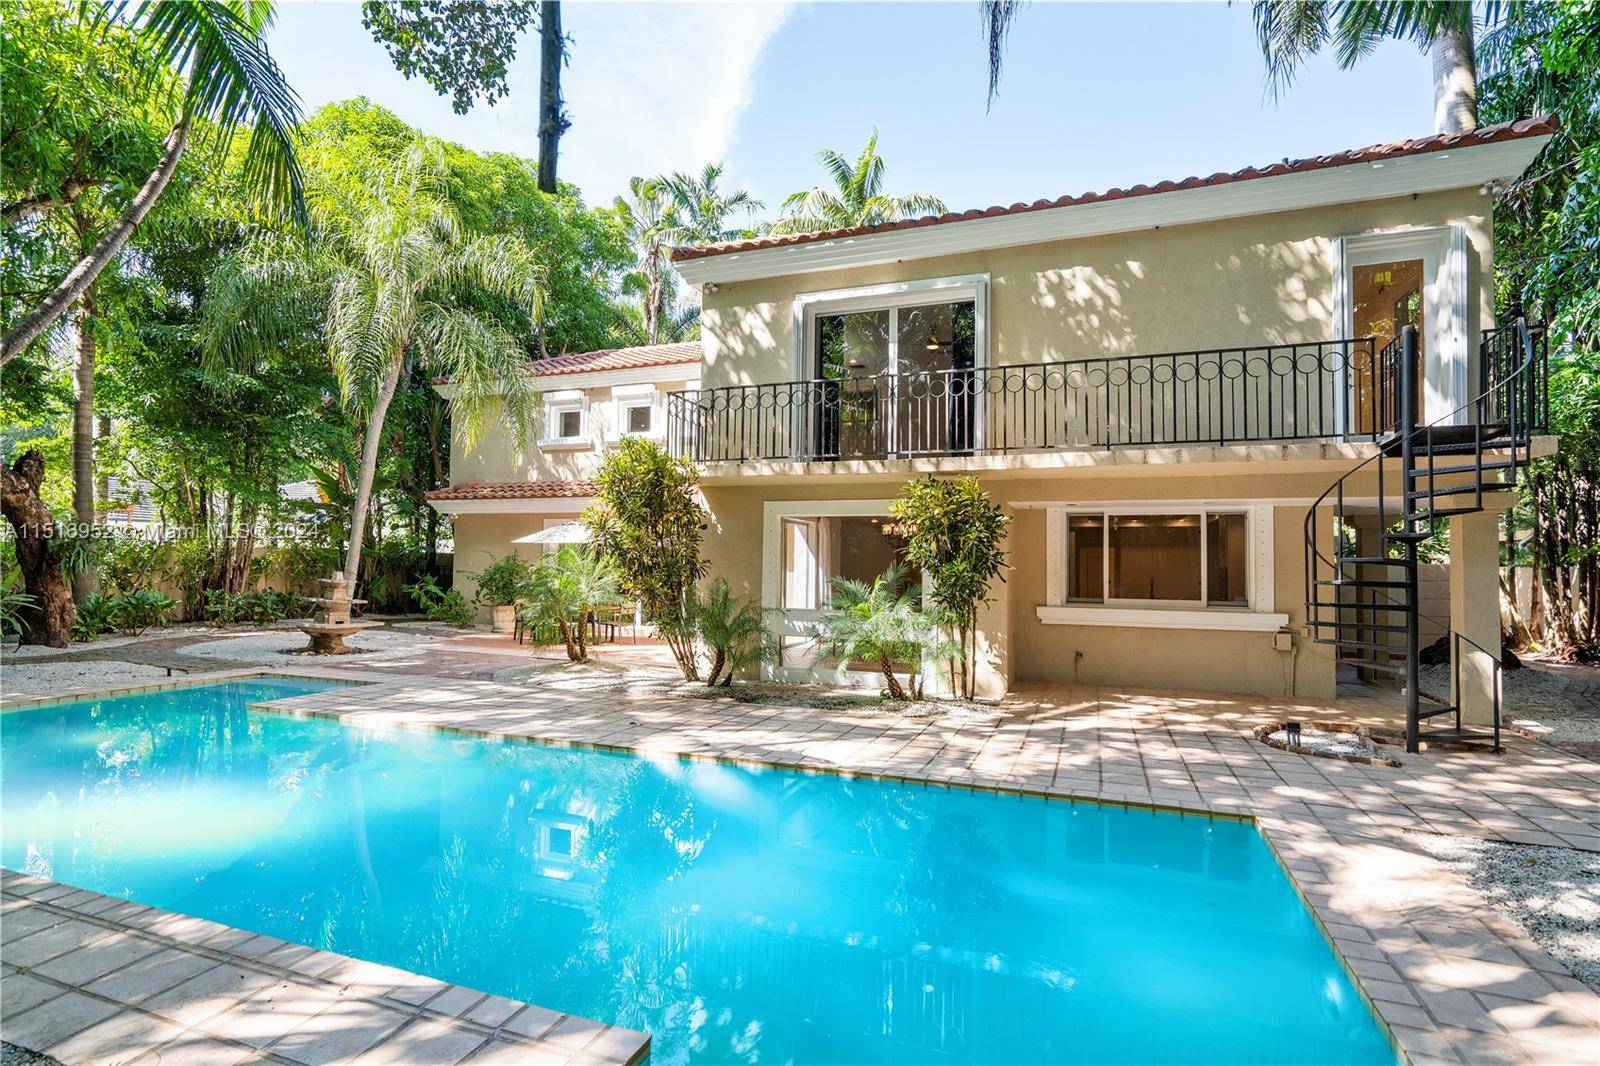 Nestled in the beautiful quiet neighborhood of South Coconut Grove, this gorgeous Mediterranean home is situated on a lush private 13, 000 Sq.